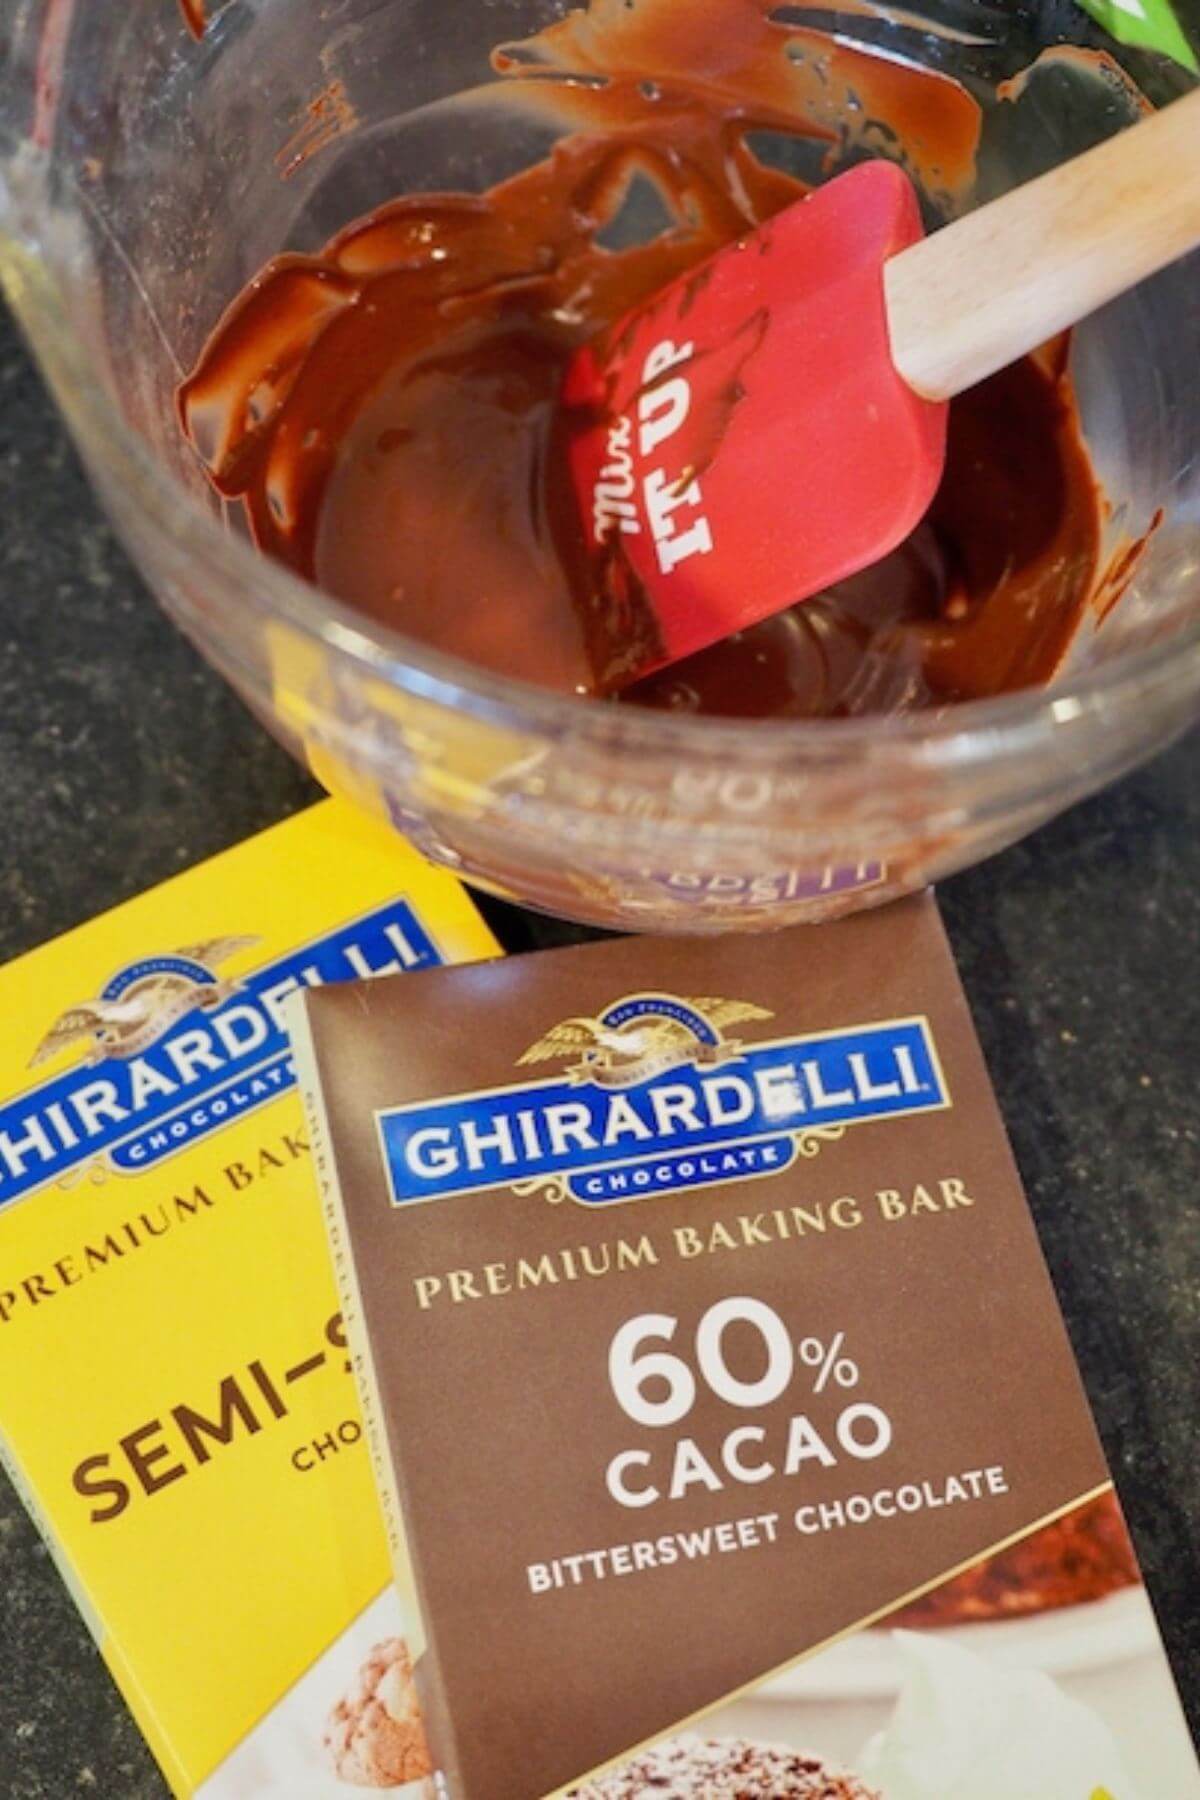 Ghirardelli chocolate packages near melted chocolate.